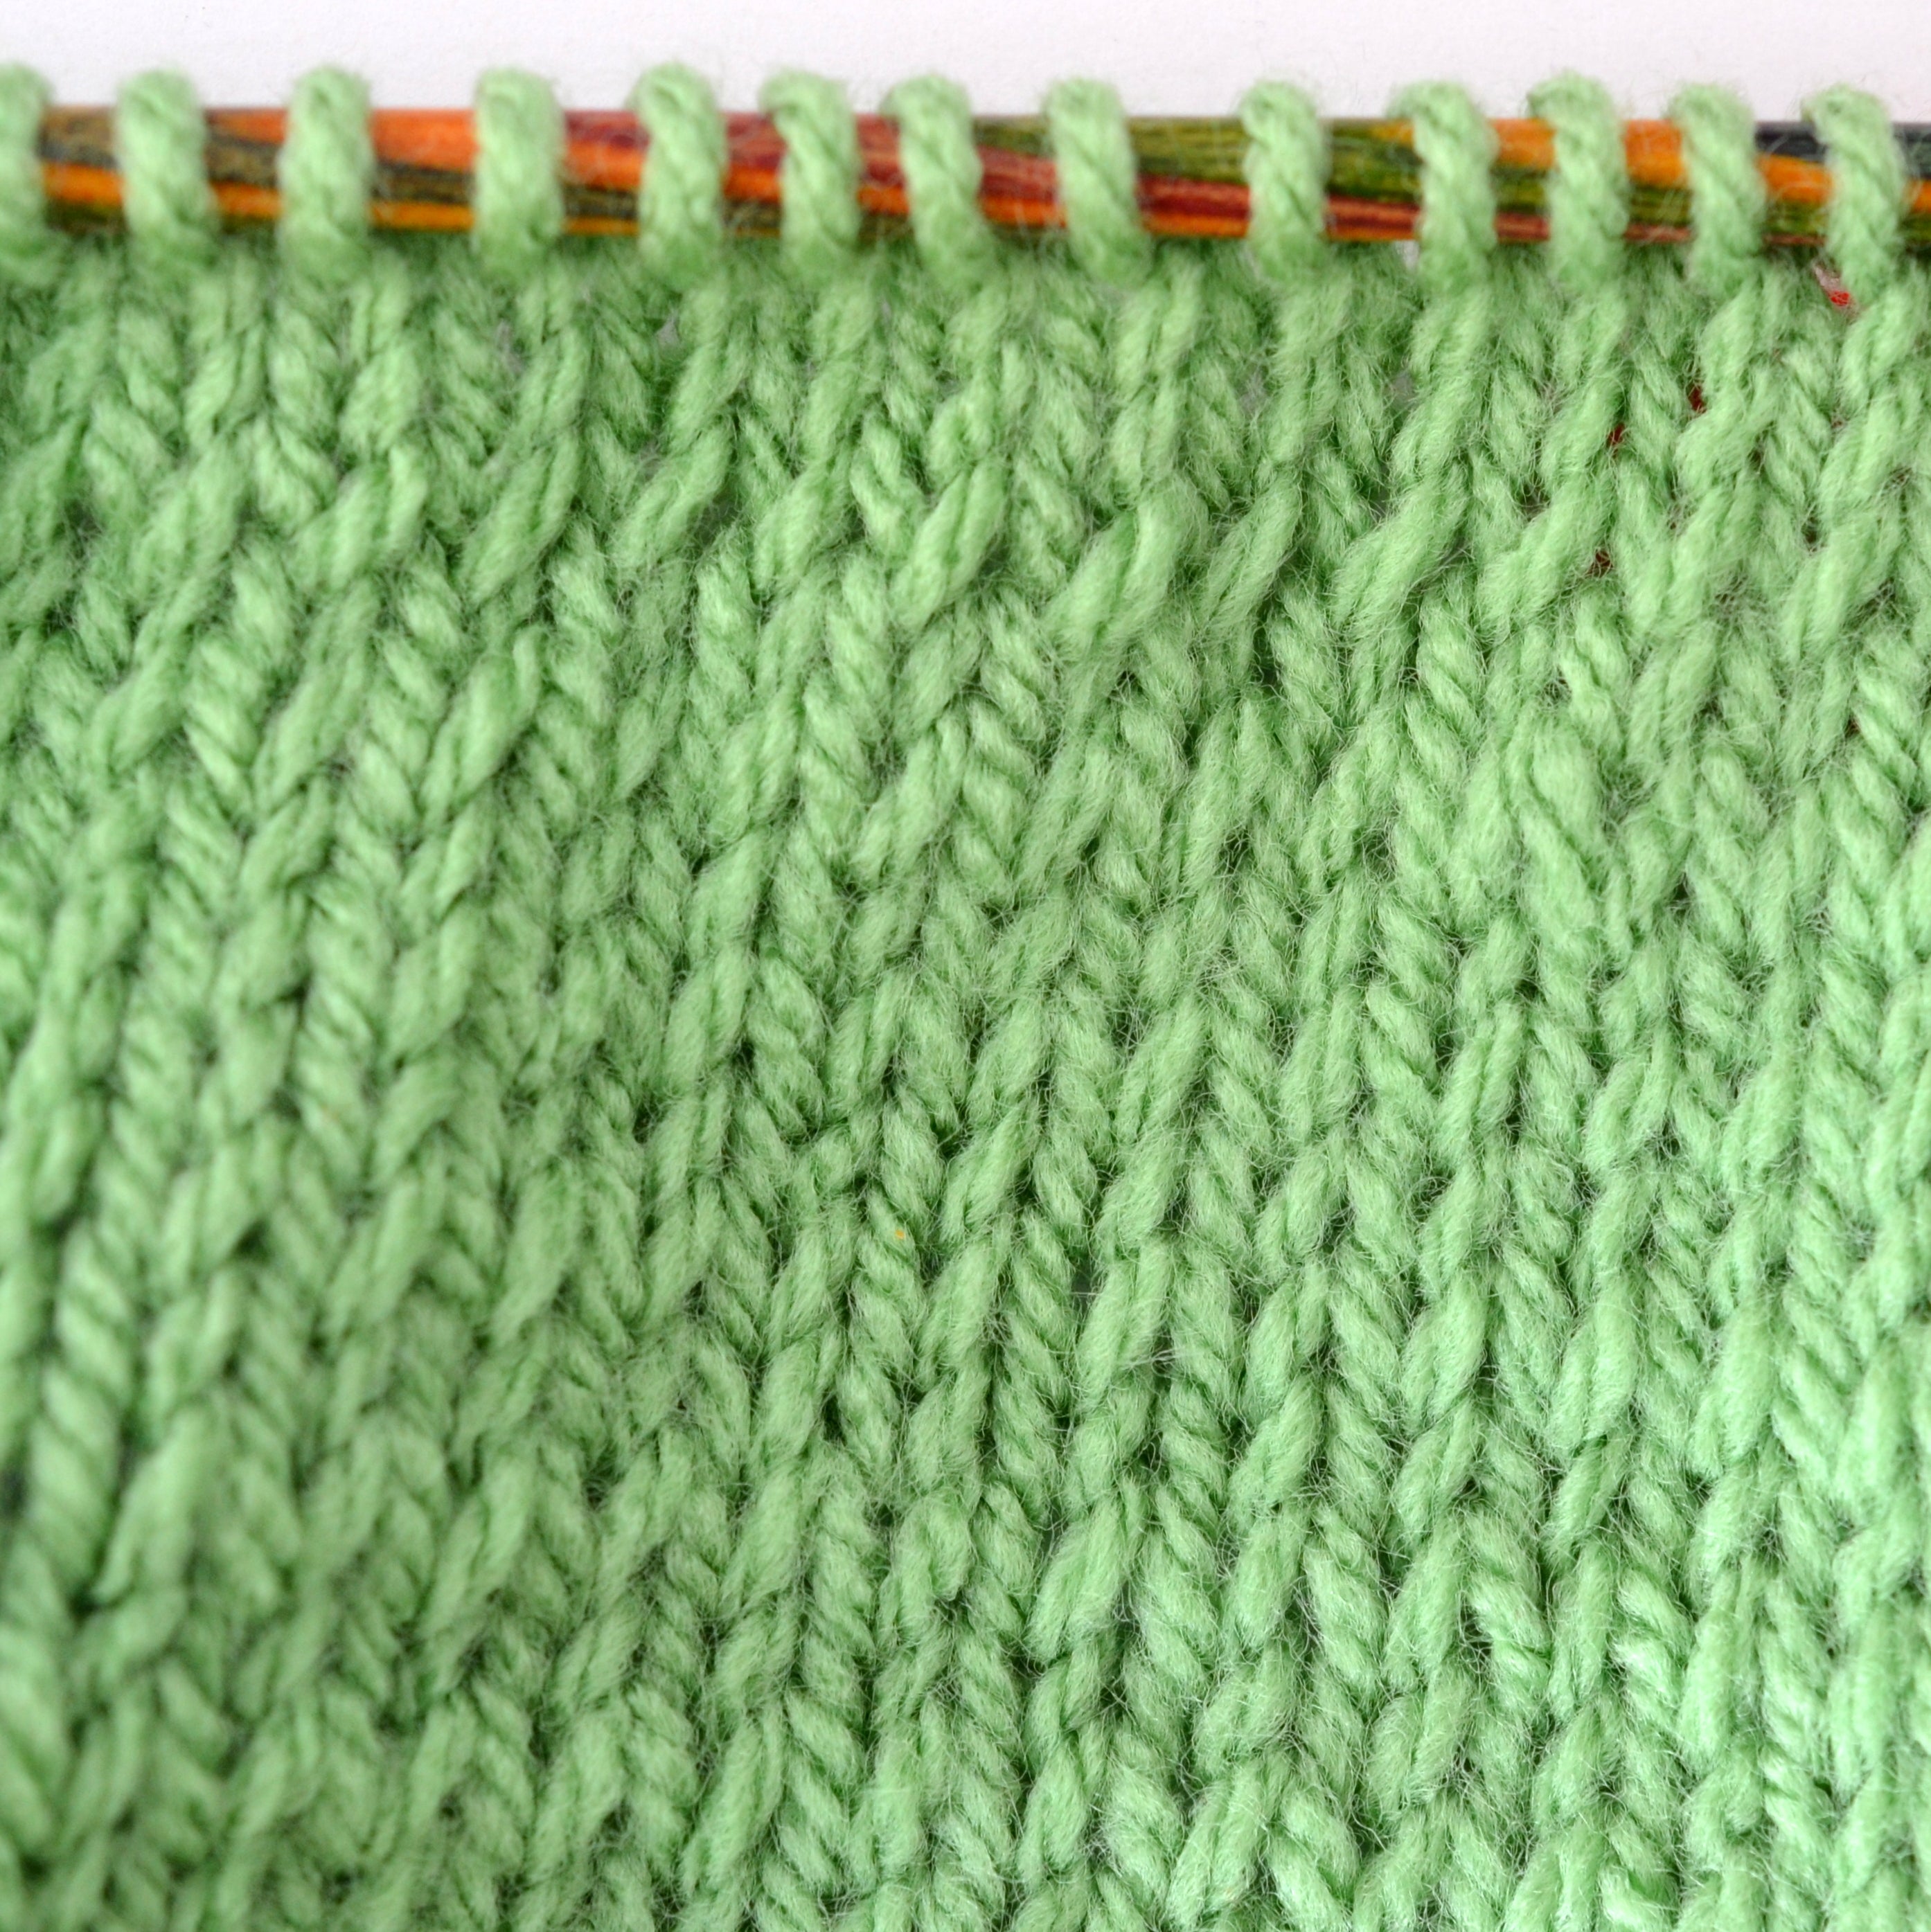 Swatch of knit fabric